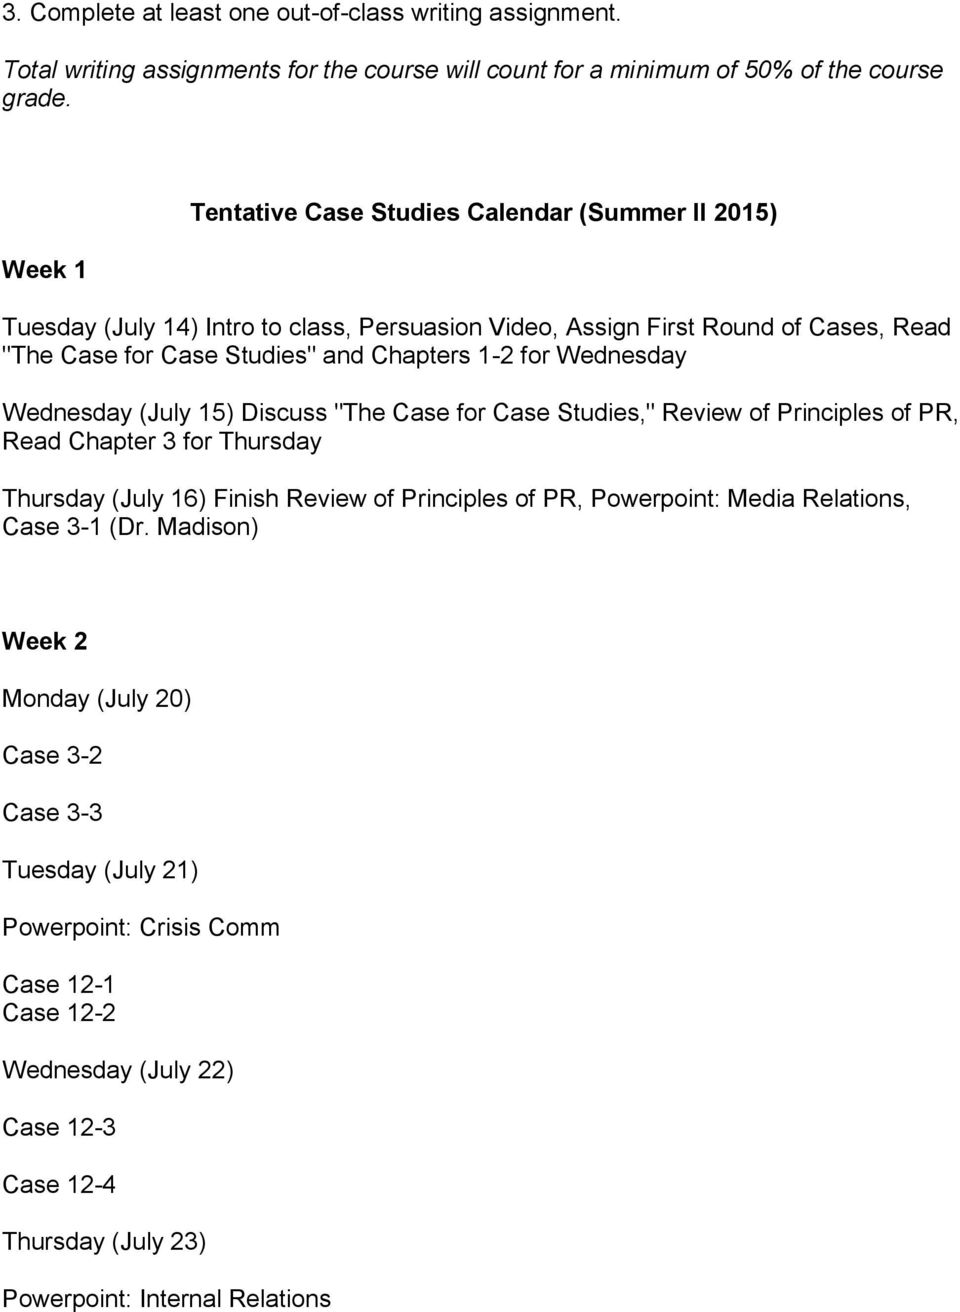 Wednesday Wednesday (July 15) Discuss "The Case for Case Studies," Review of Principles of PR, Read Chapter 3 for Thursday Thursday (July 16) Finish Review of Principles of PR, Powerpoint: